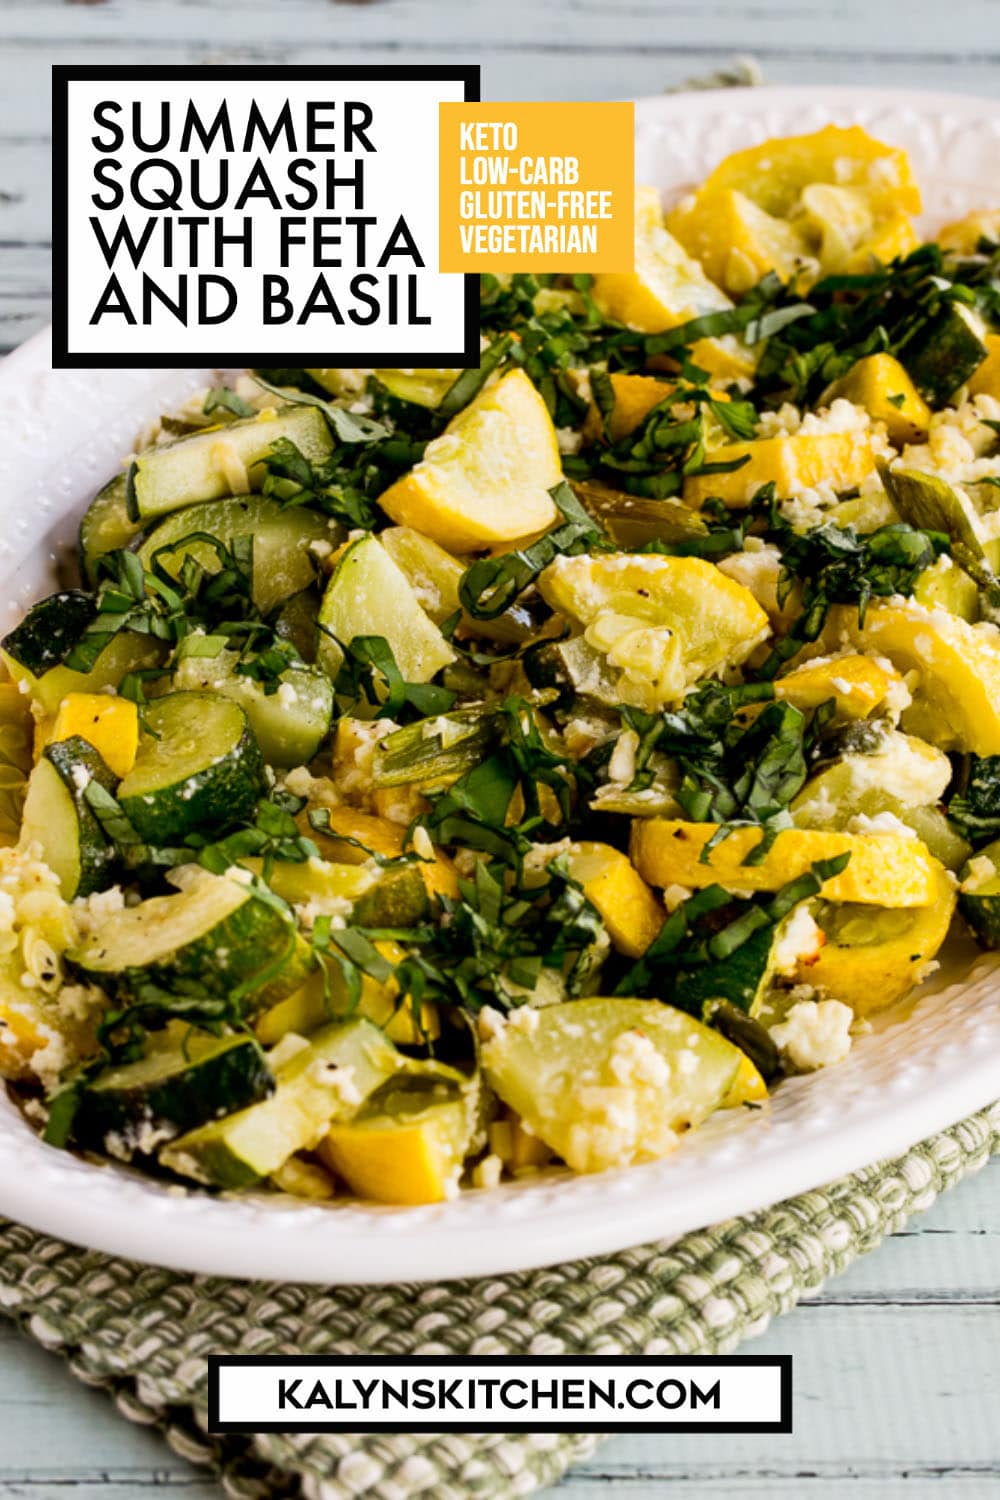 Pinterest image of Summer Squash with Feta and Basil